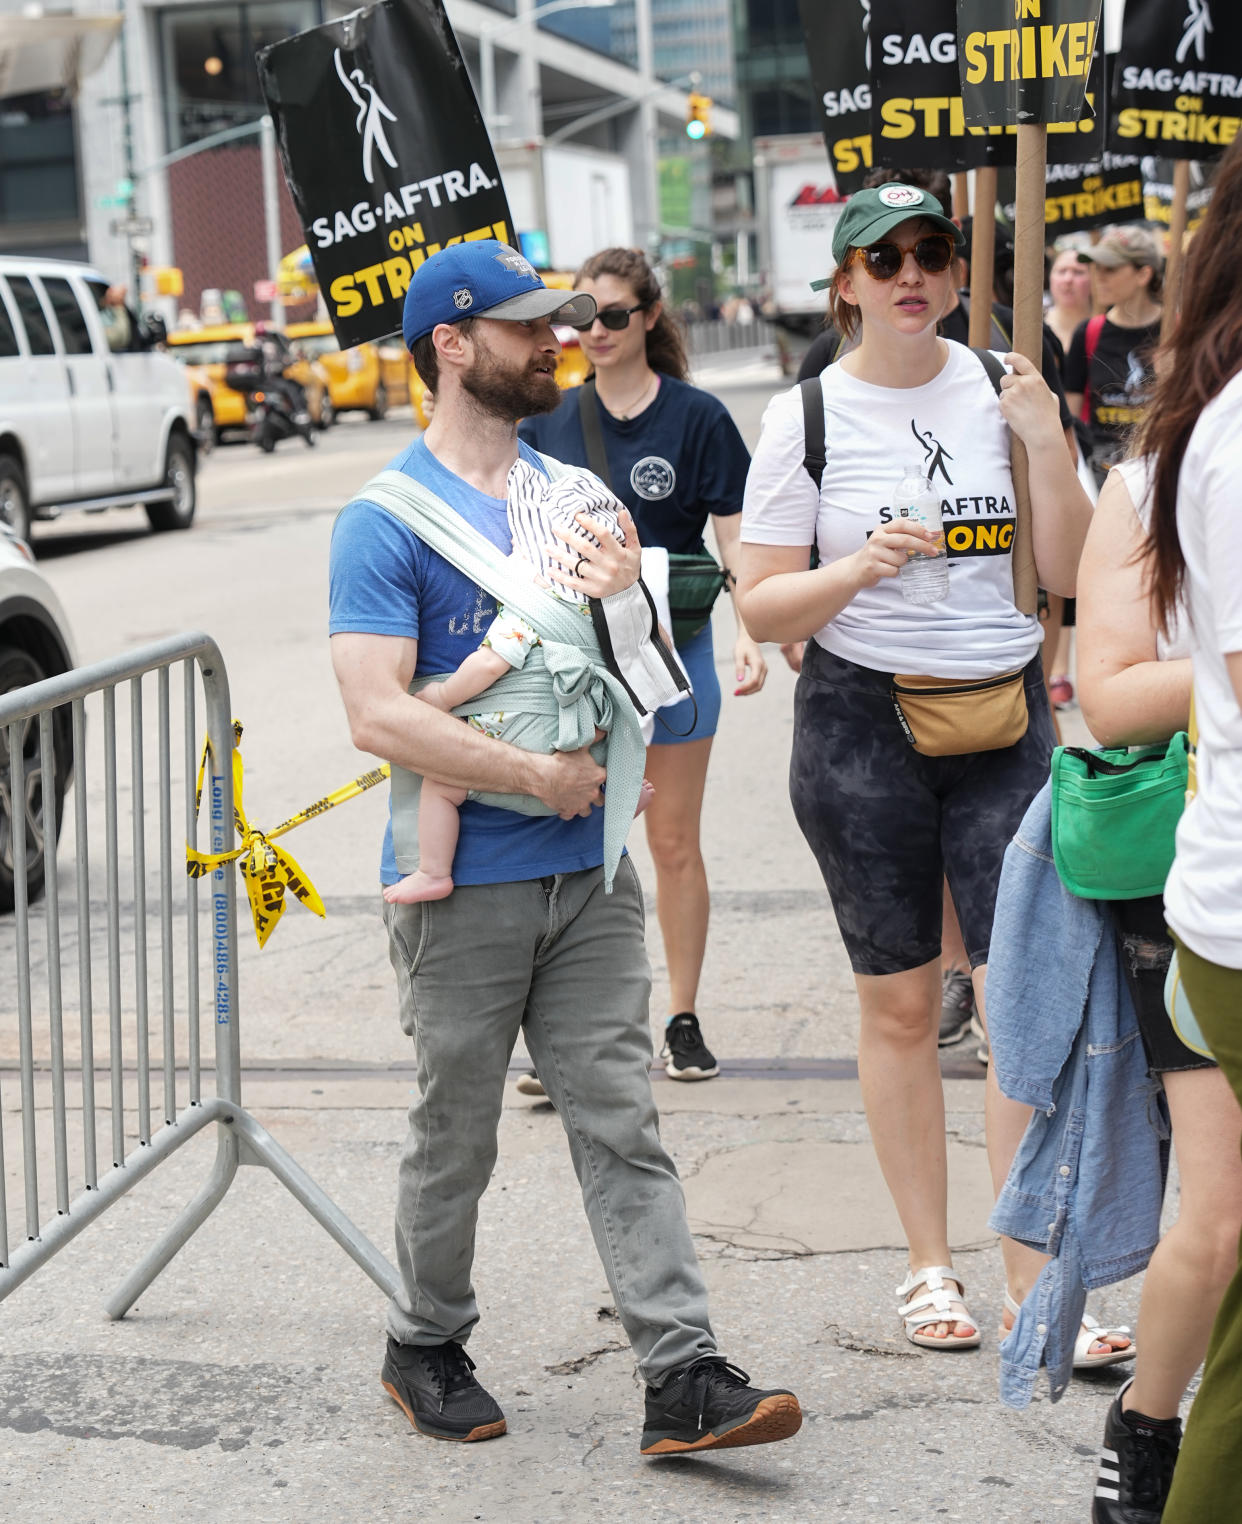 It was a family affair at the New York picket line. (John Nacion / Getty Images)